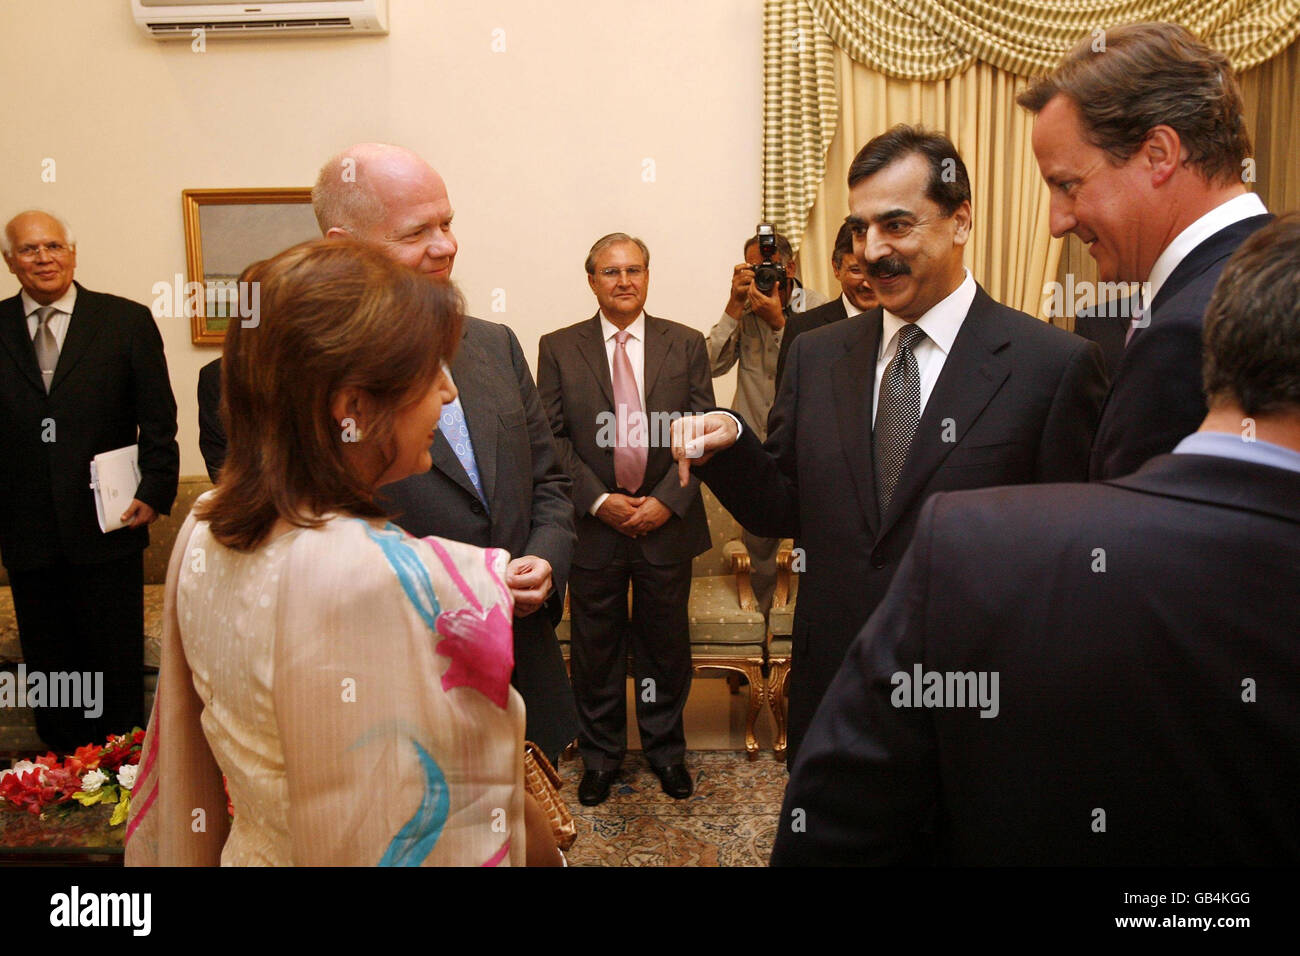 Conservative Party leader David Cameron (right) introduces the Pakistani Prime Minister Yousuf Raza Gilani to the Shadow Cohesion Minister Baroness Sayeeda Warsi (nearest left) and the Shadow Foreign Secretary William Hague at Prime Minister's House in Islamabad, Pakistan. Stock Photo